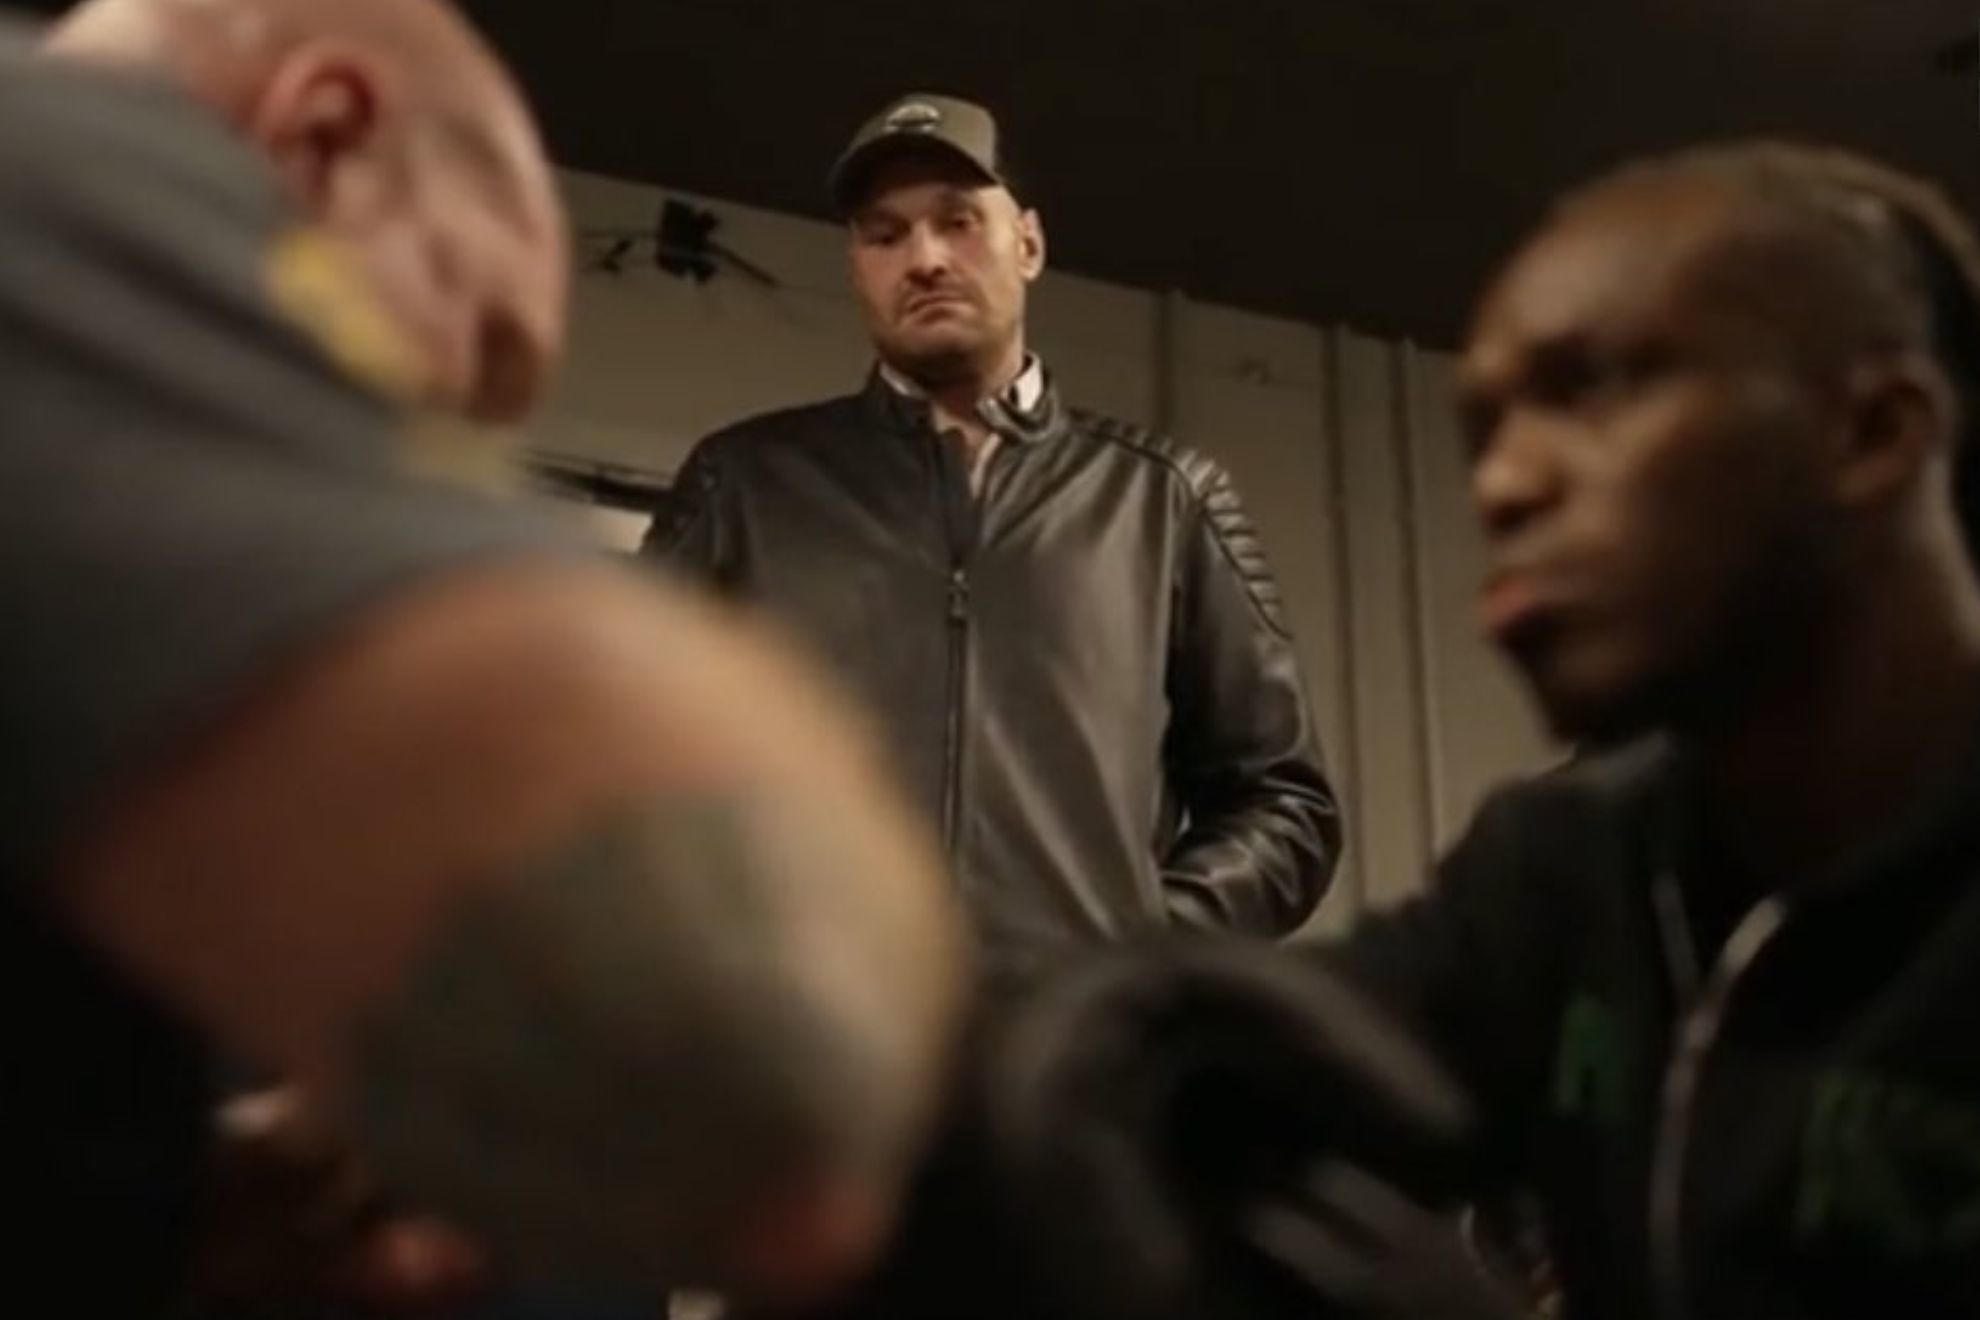 Tyson Fury intimidates KSI prior to brother Tommy Fury beating him